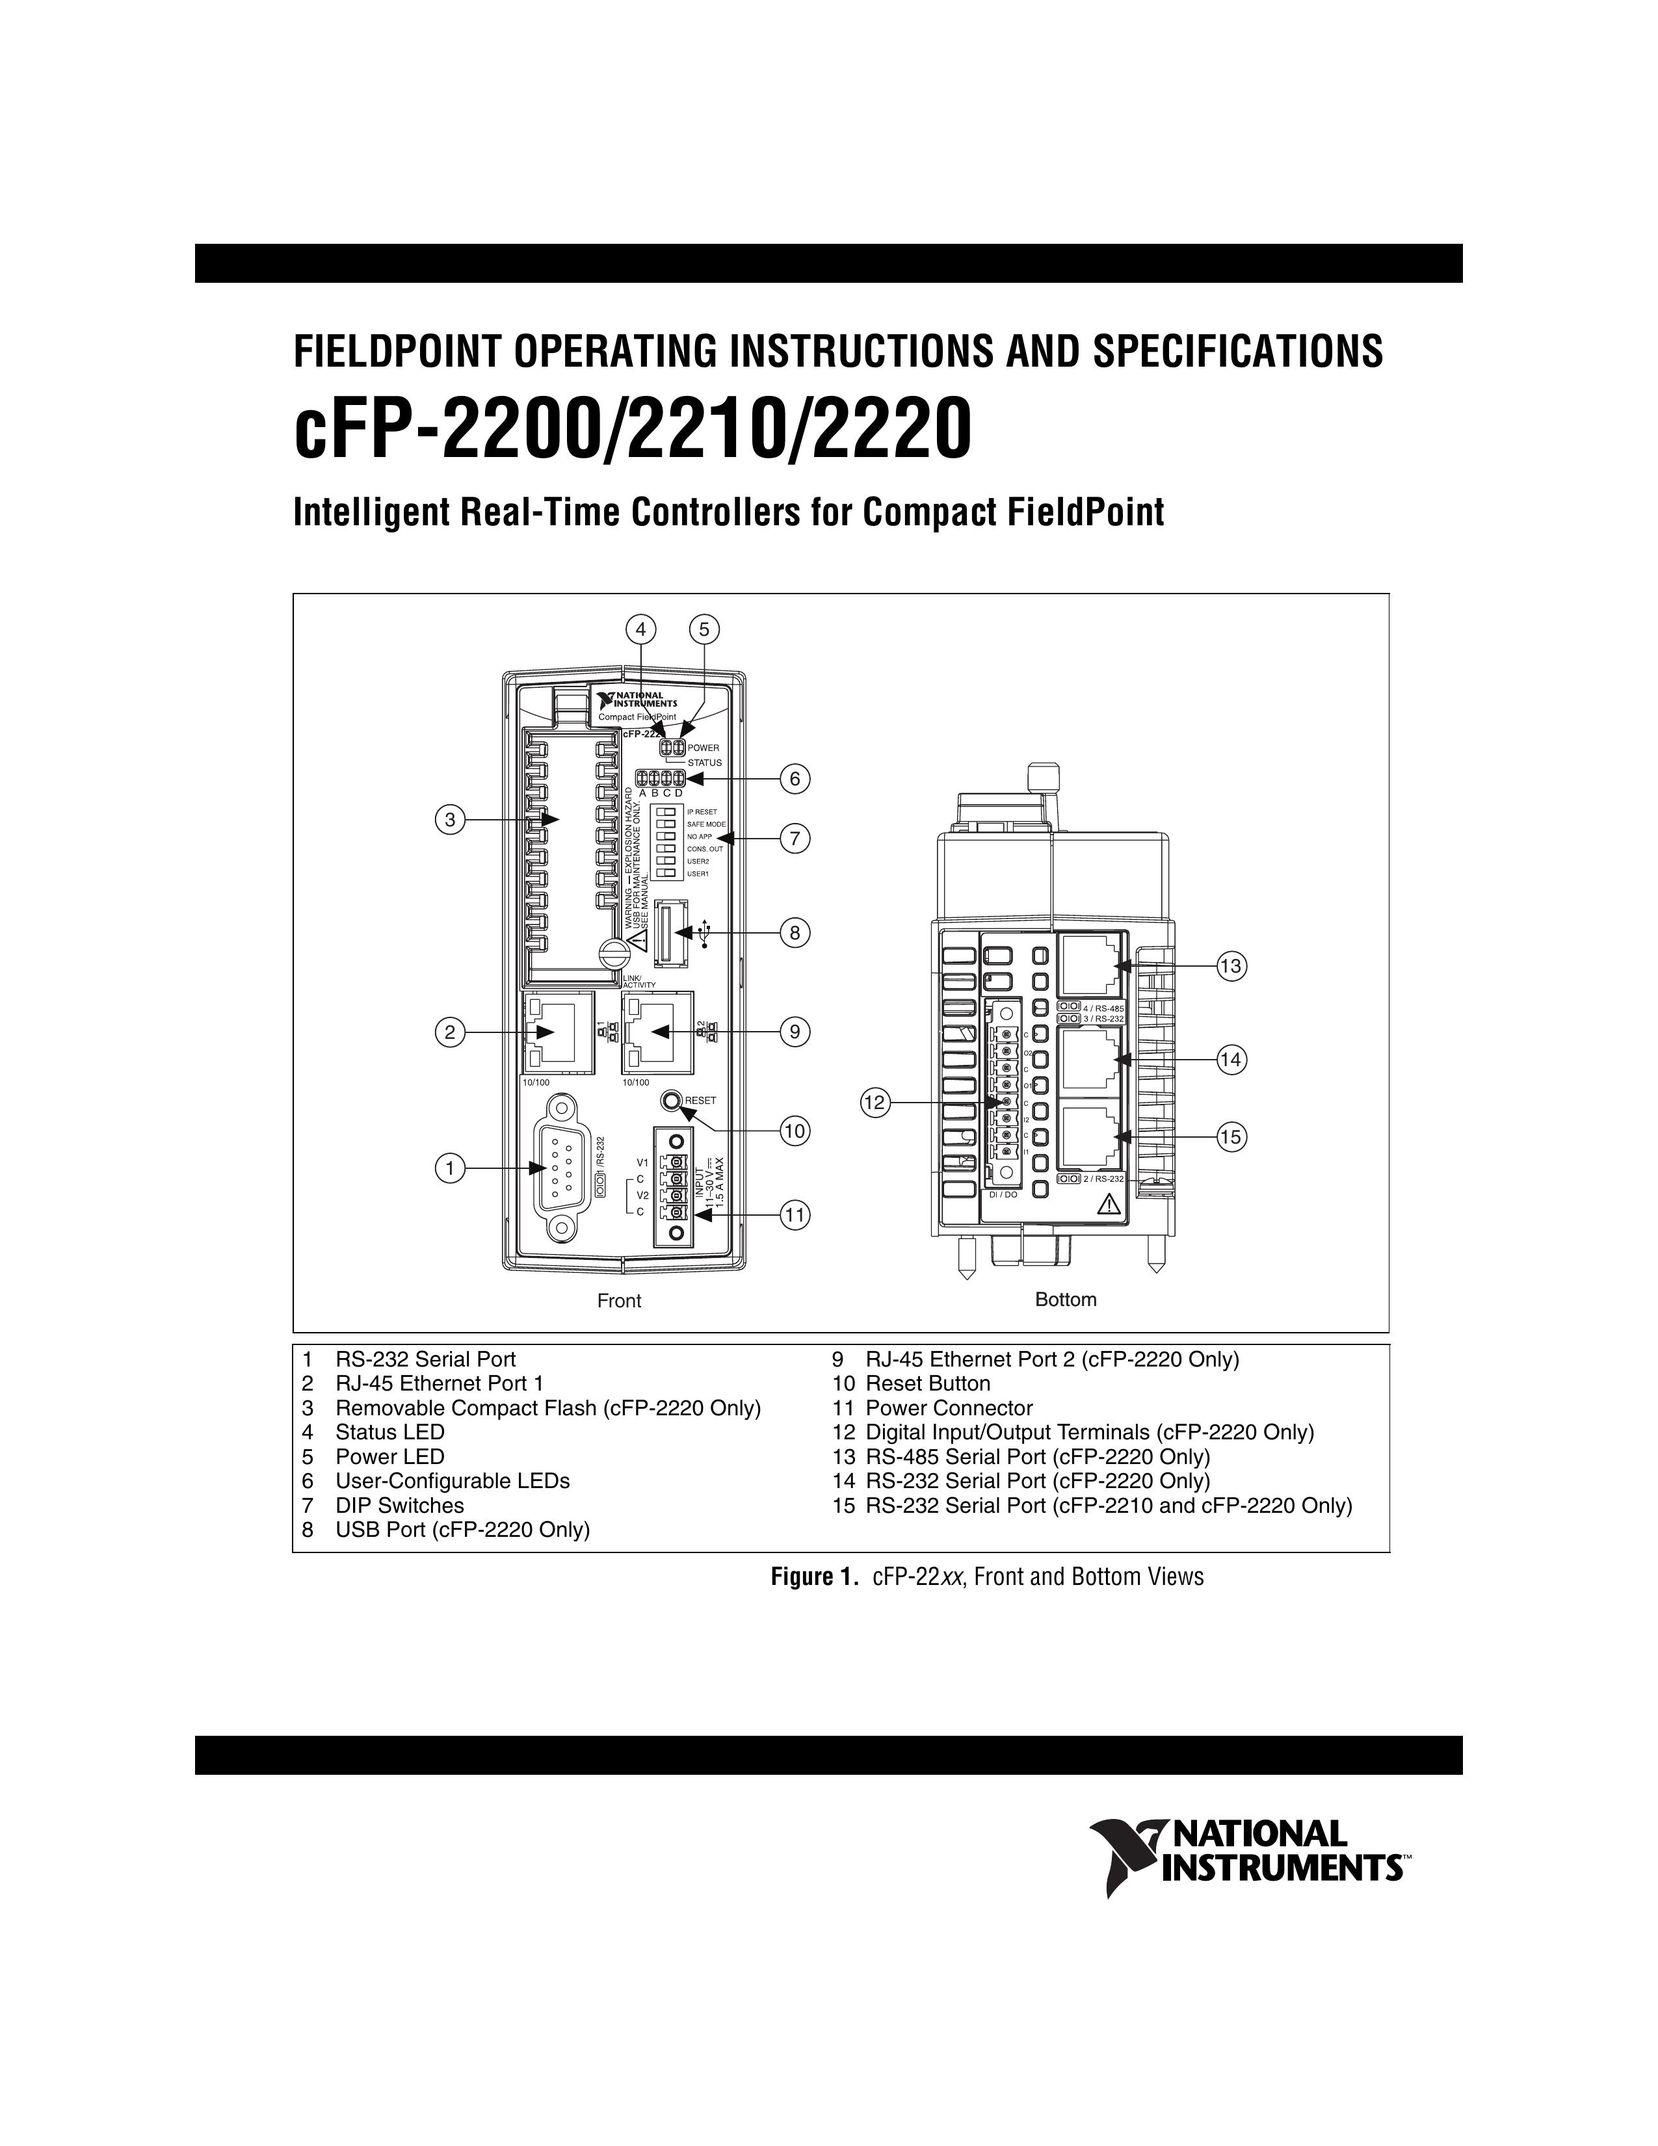 National Instruments CFP-2210 Network Card User Manual